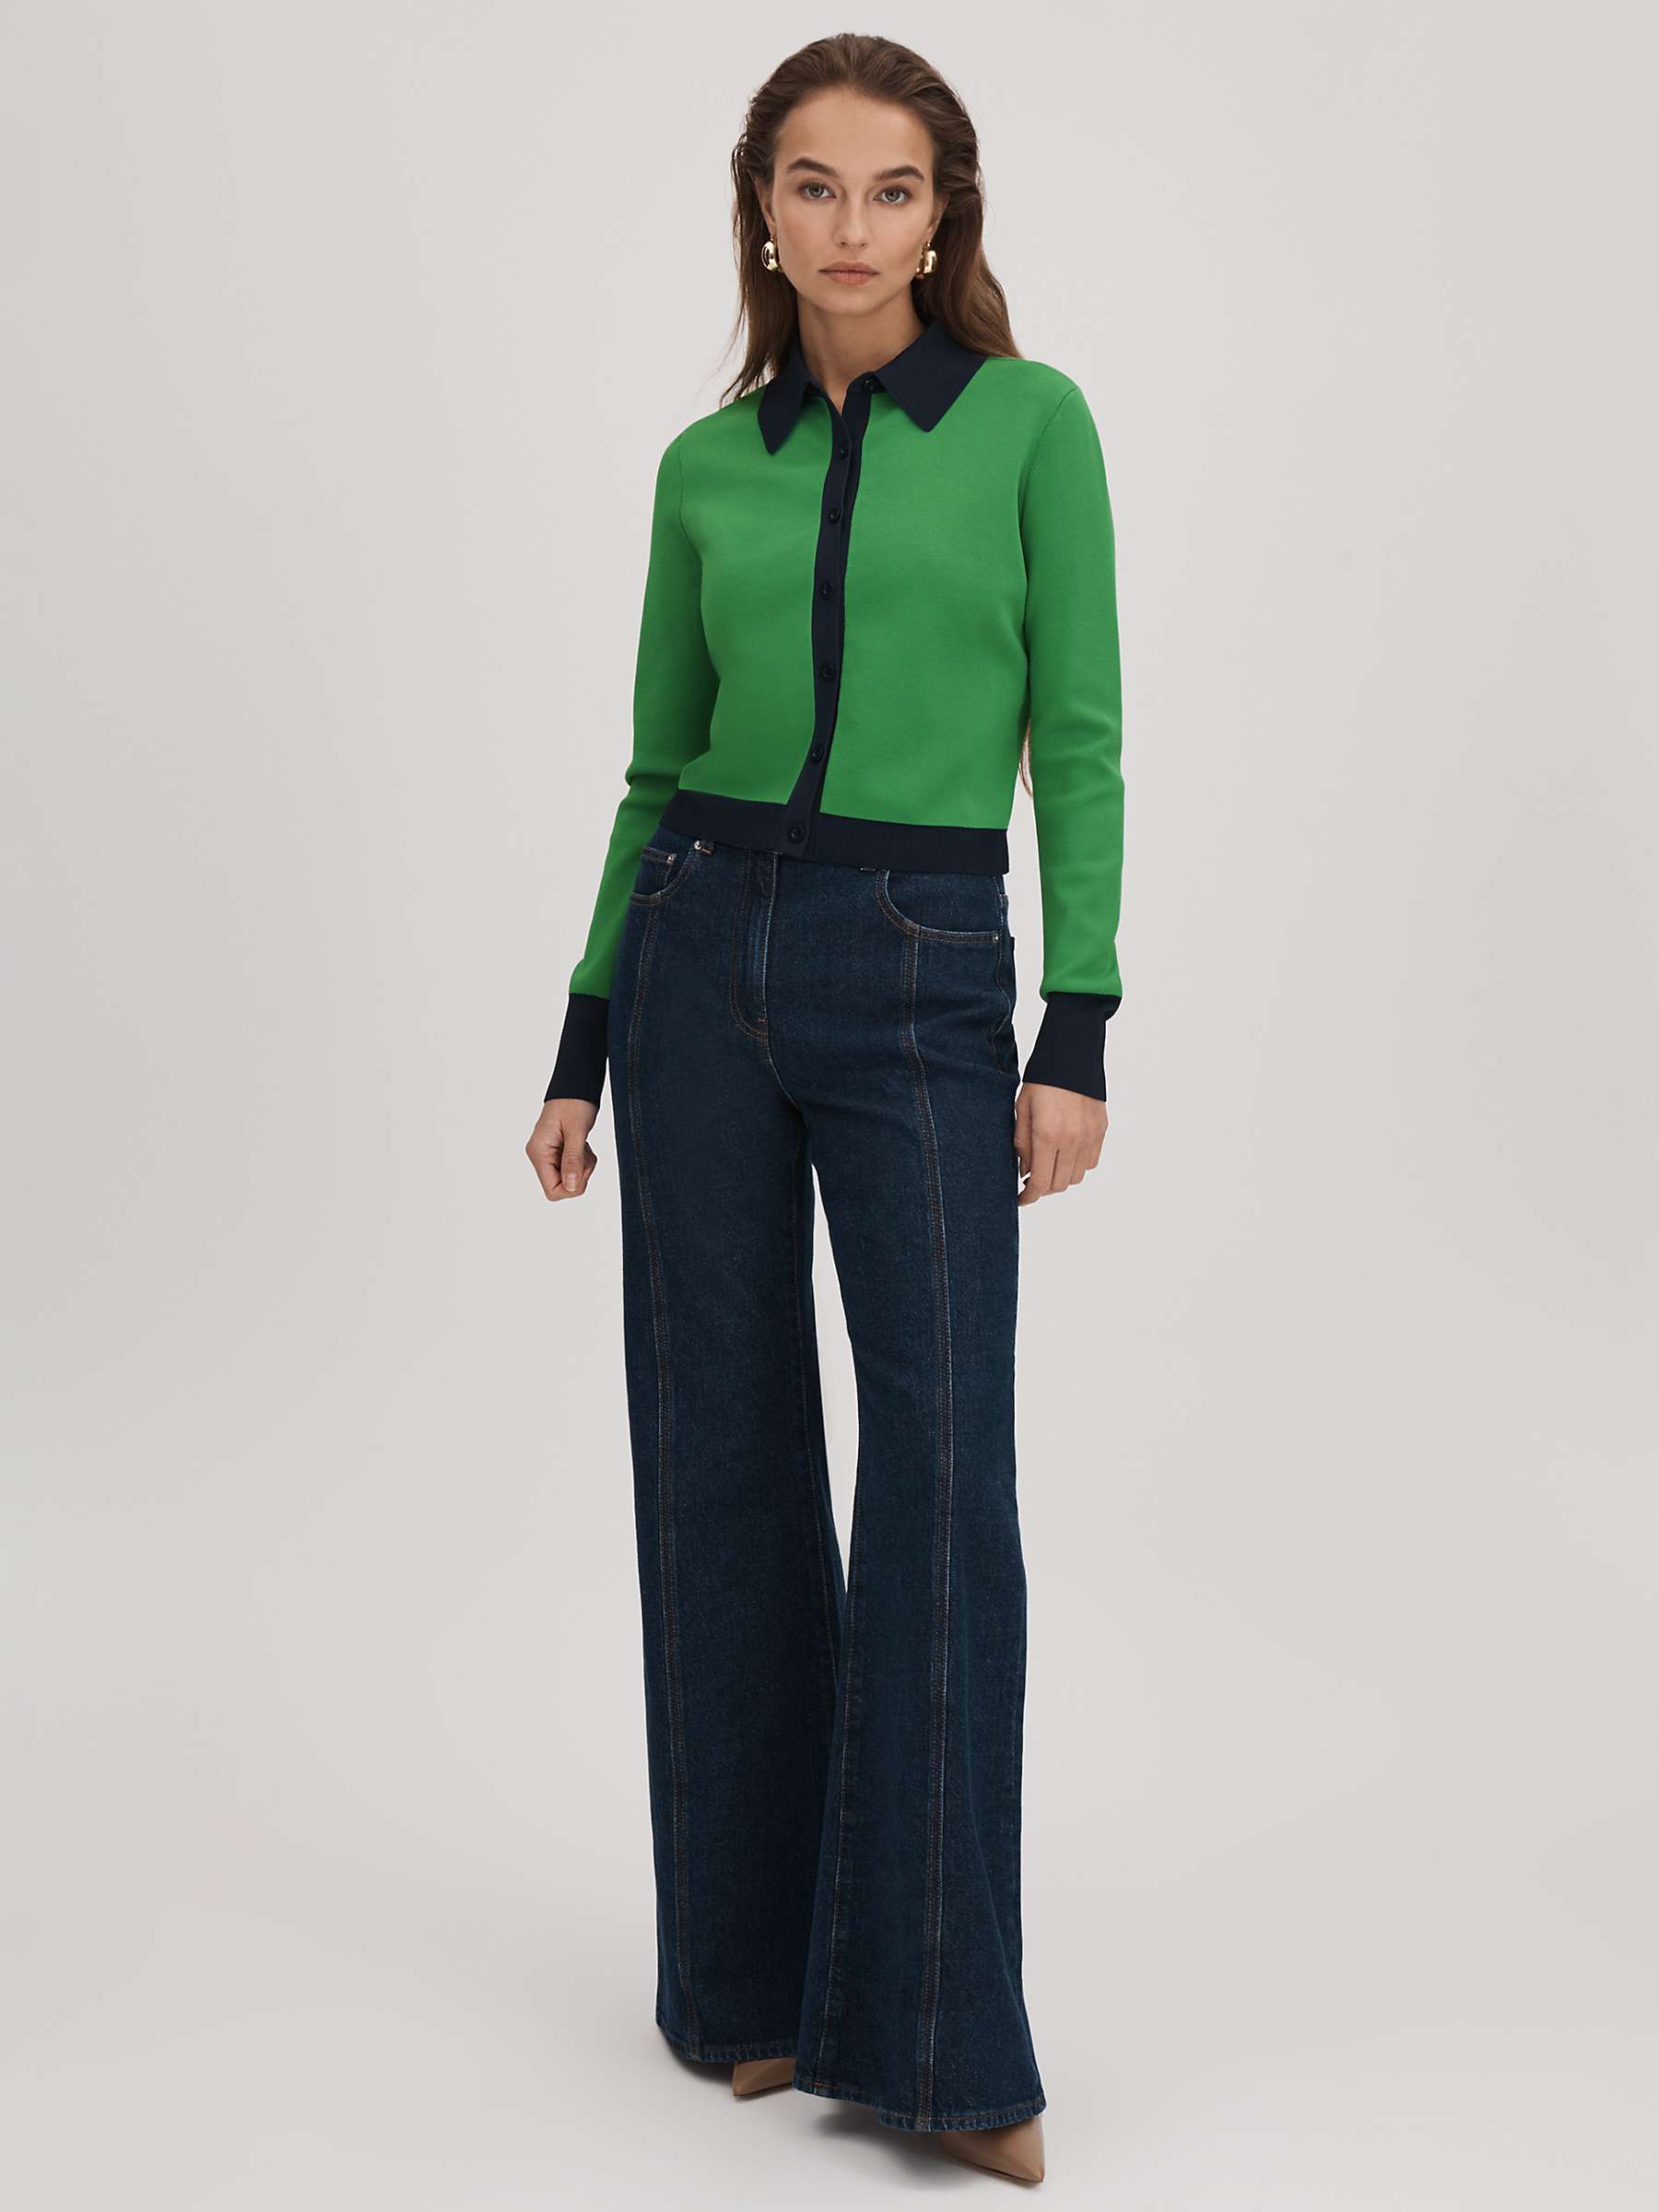 Buy FLORERE Fitted Contrast Trim Cardigan, Bright Green/Navy Online at johnlewis.com